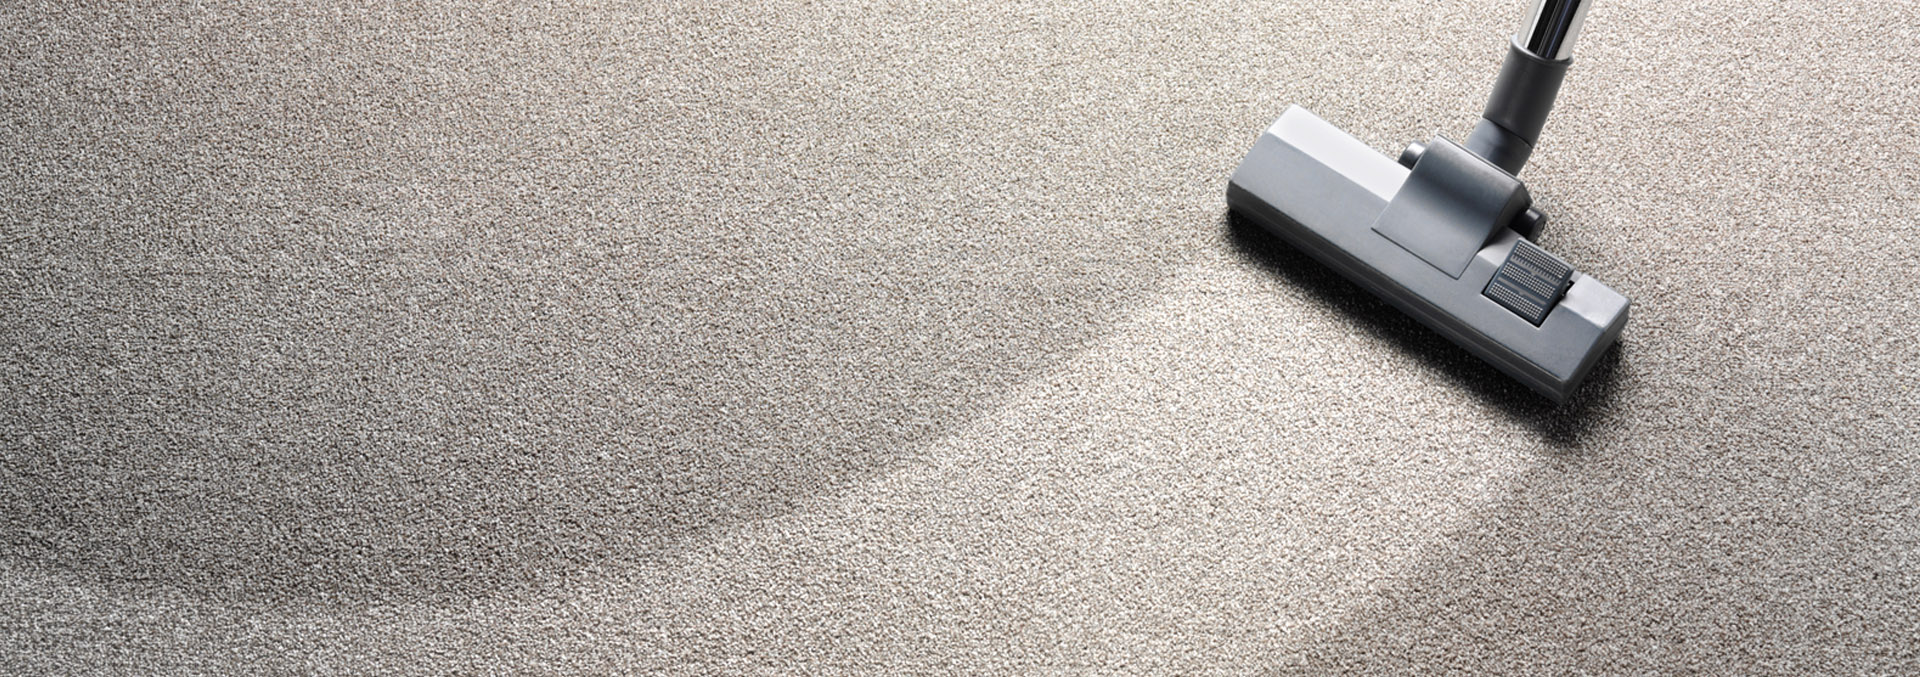 Carpet Cleaning Adelaide